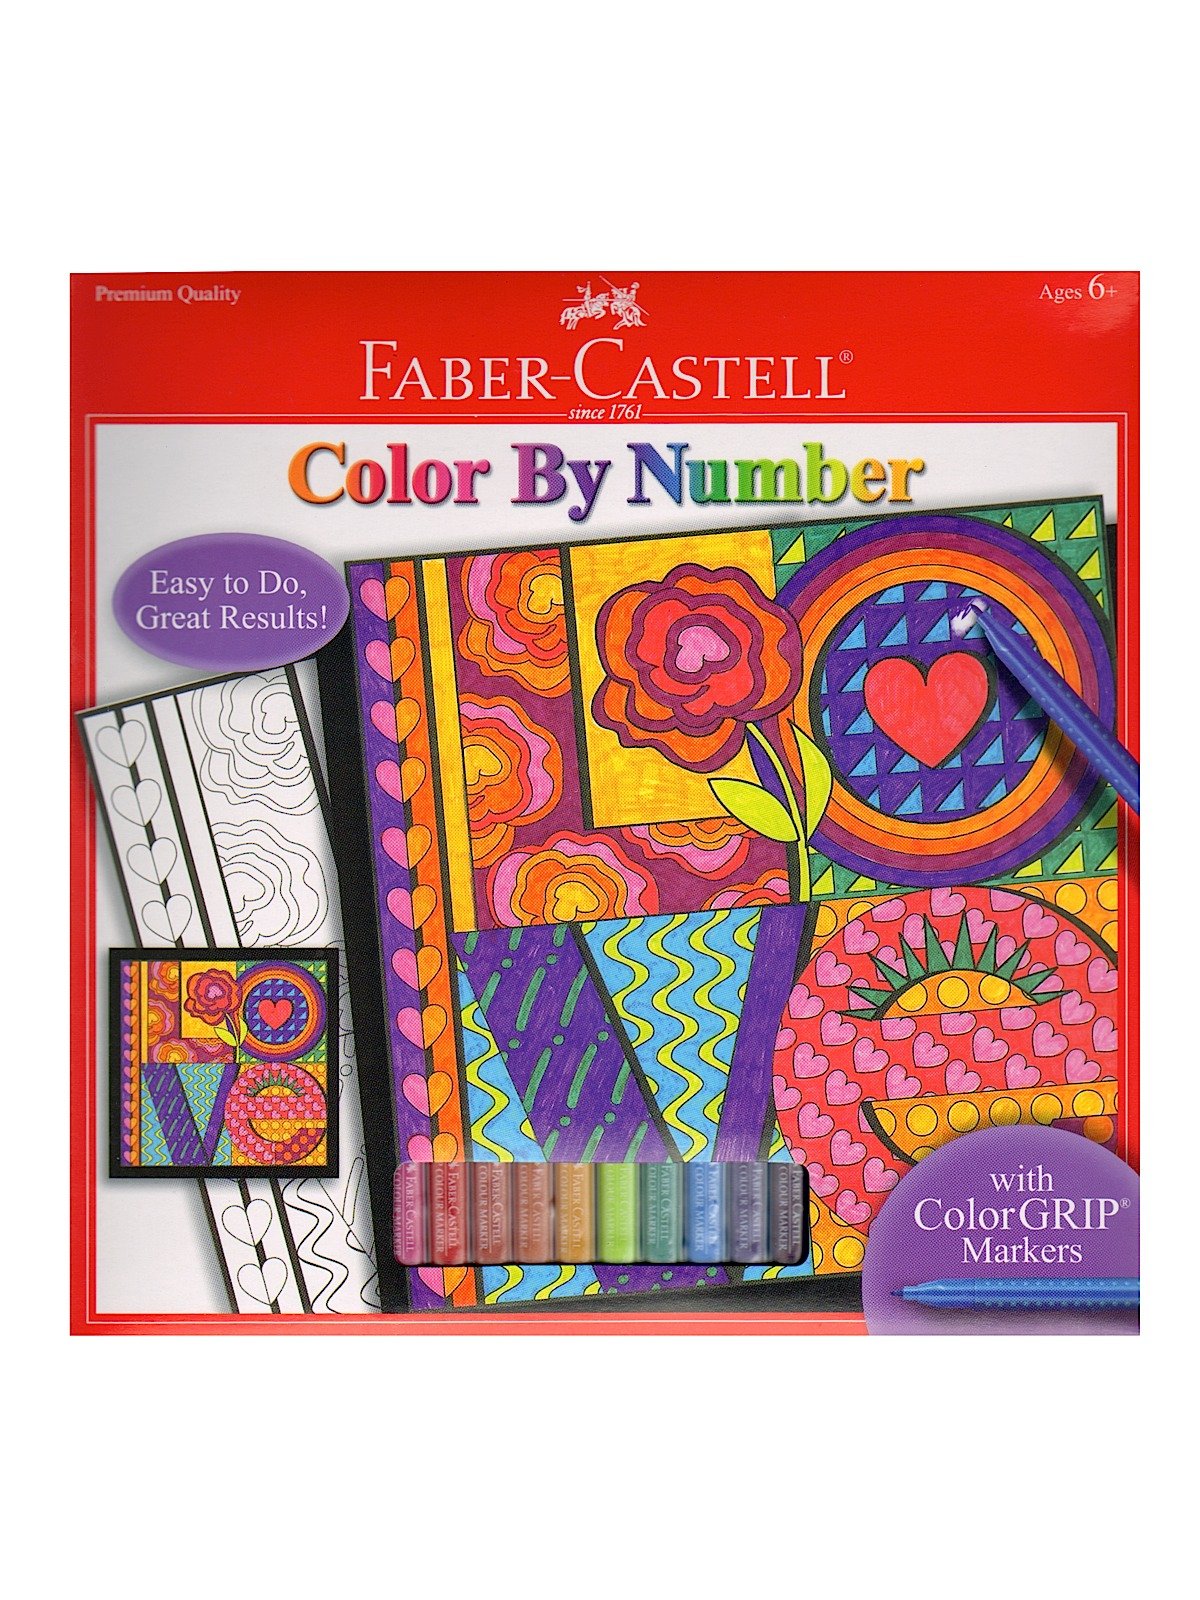 Faber-Castell - Color by Number with Markers Kits